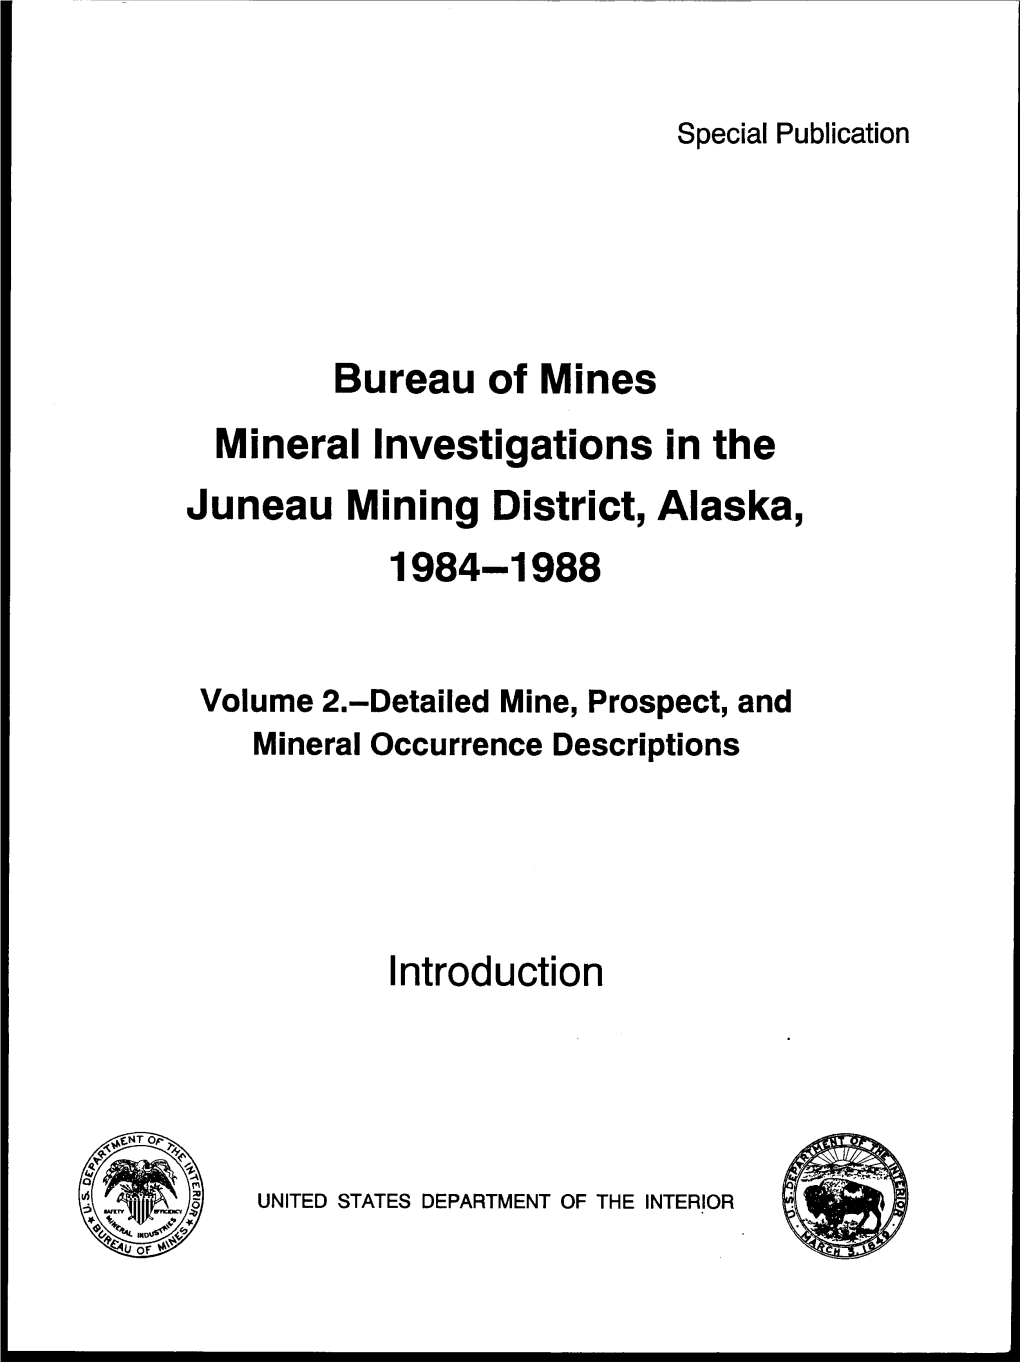 Bureau of Mines Mineral Investigations in the Juneau Mining District, Alaska, 1984-1988 Introduction